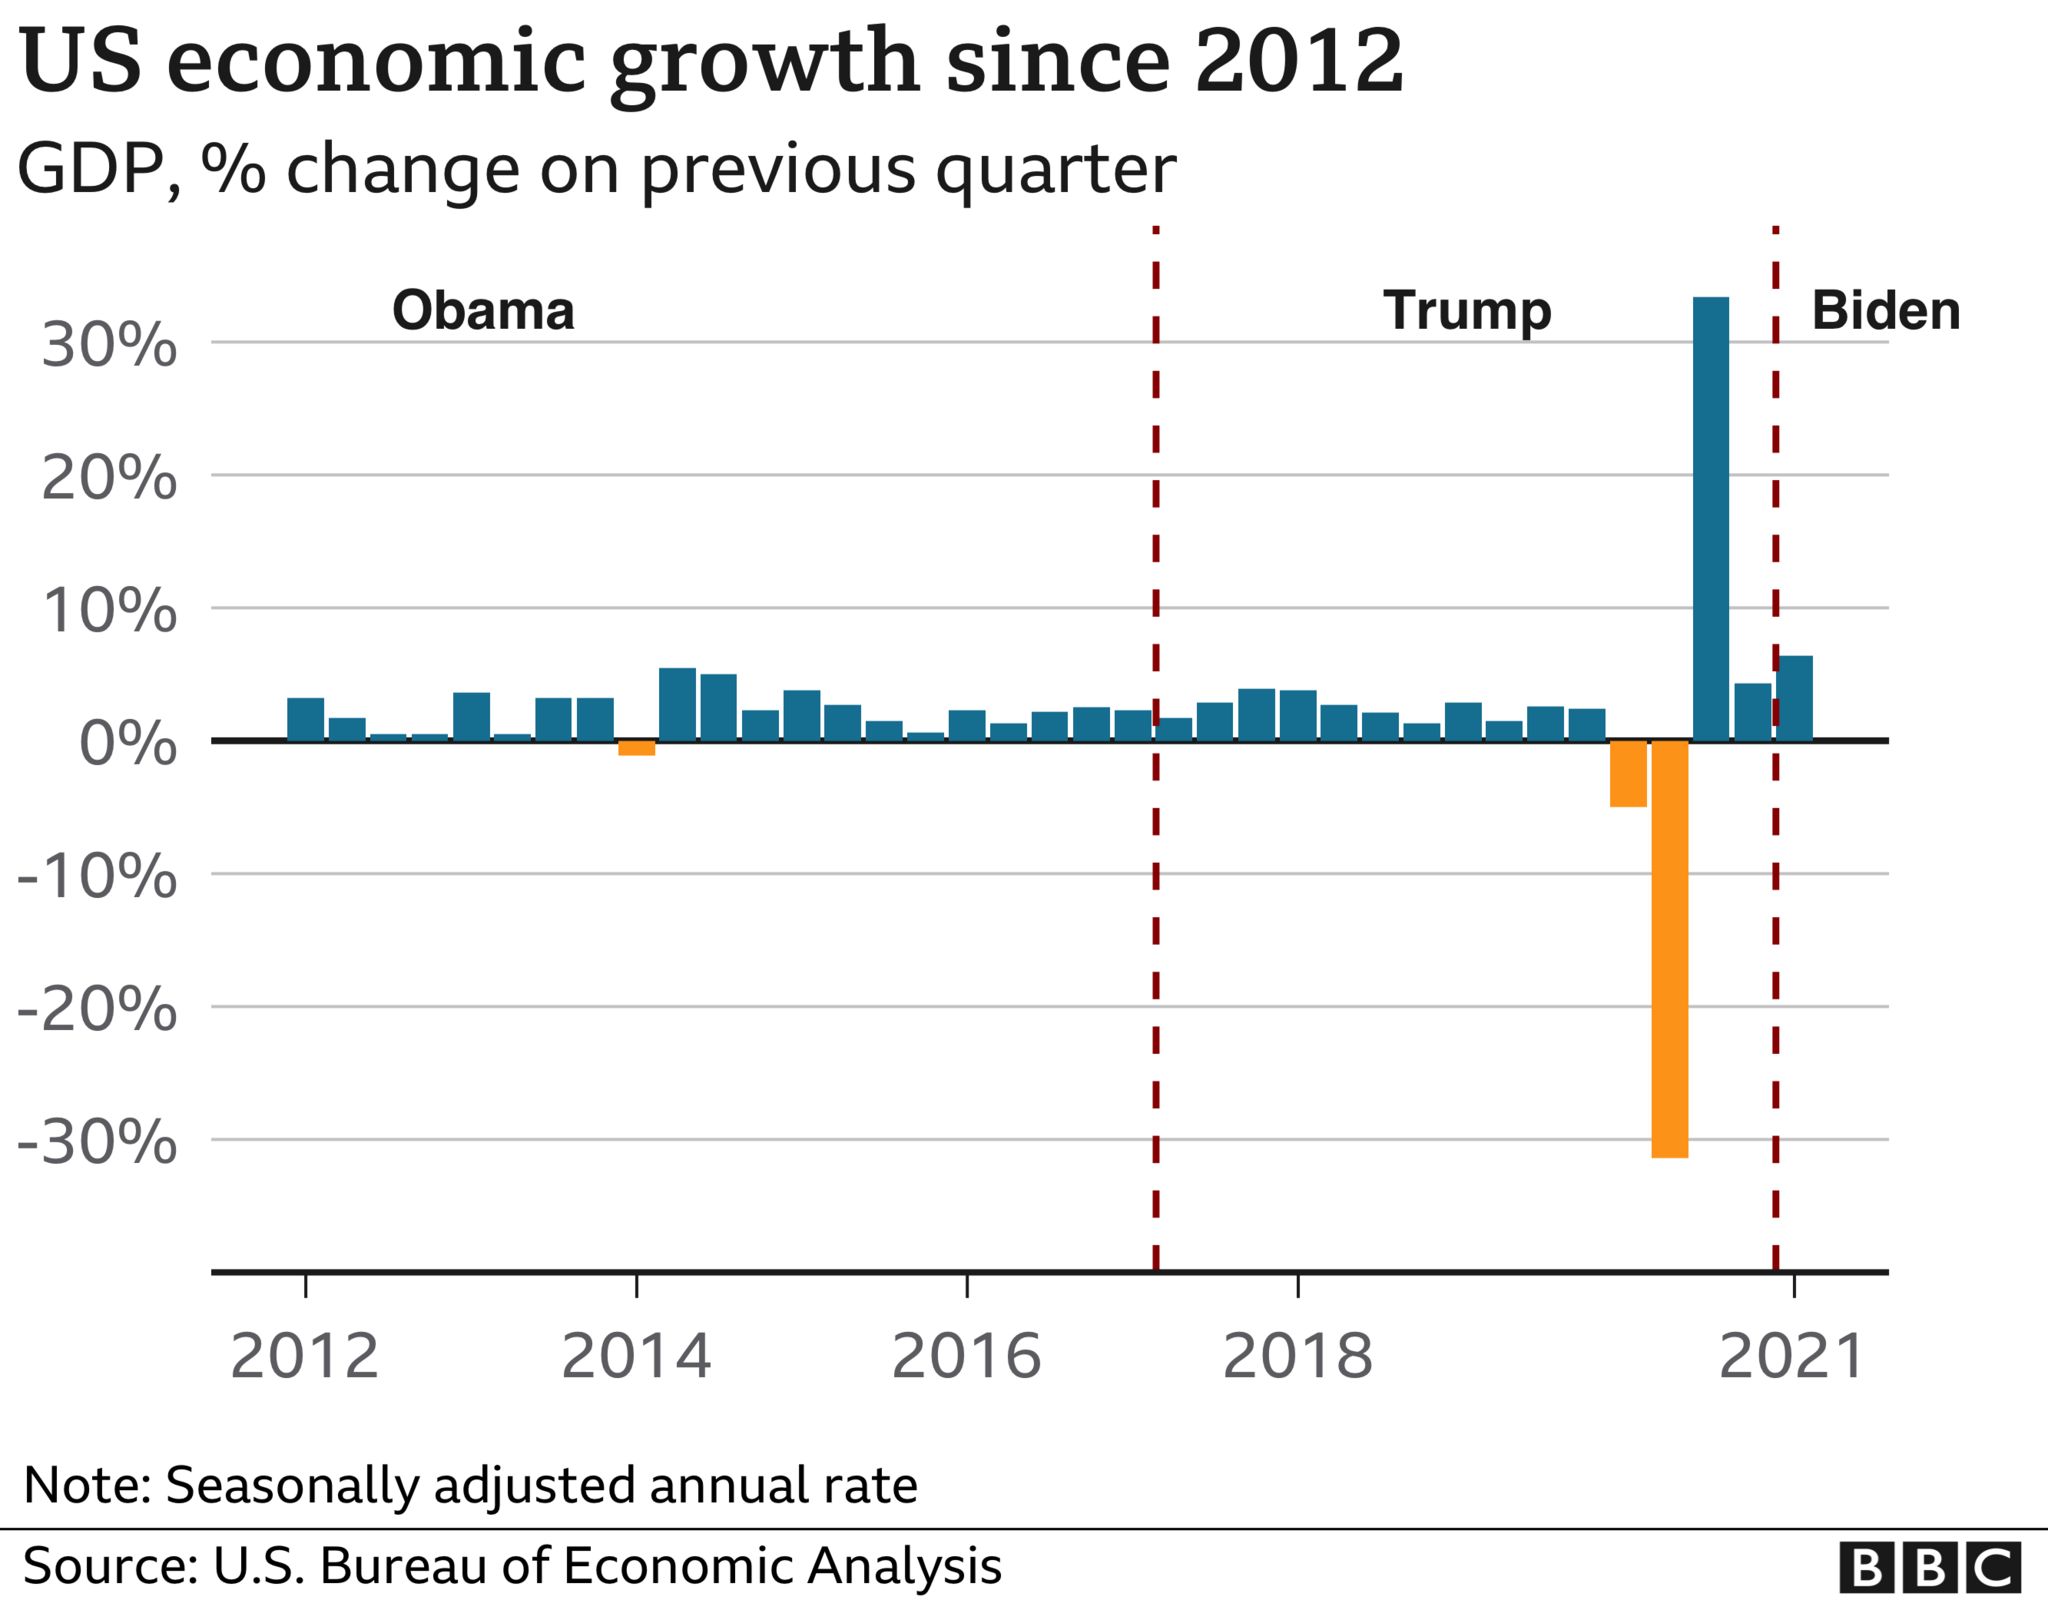 US GDP since 2012